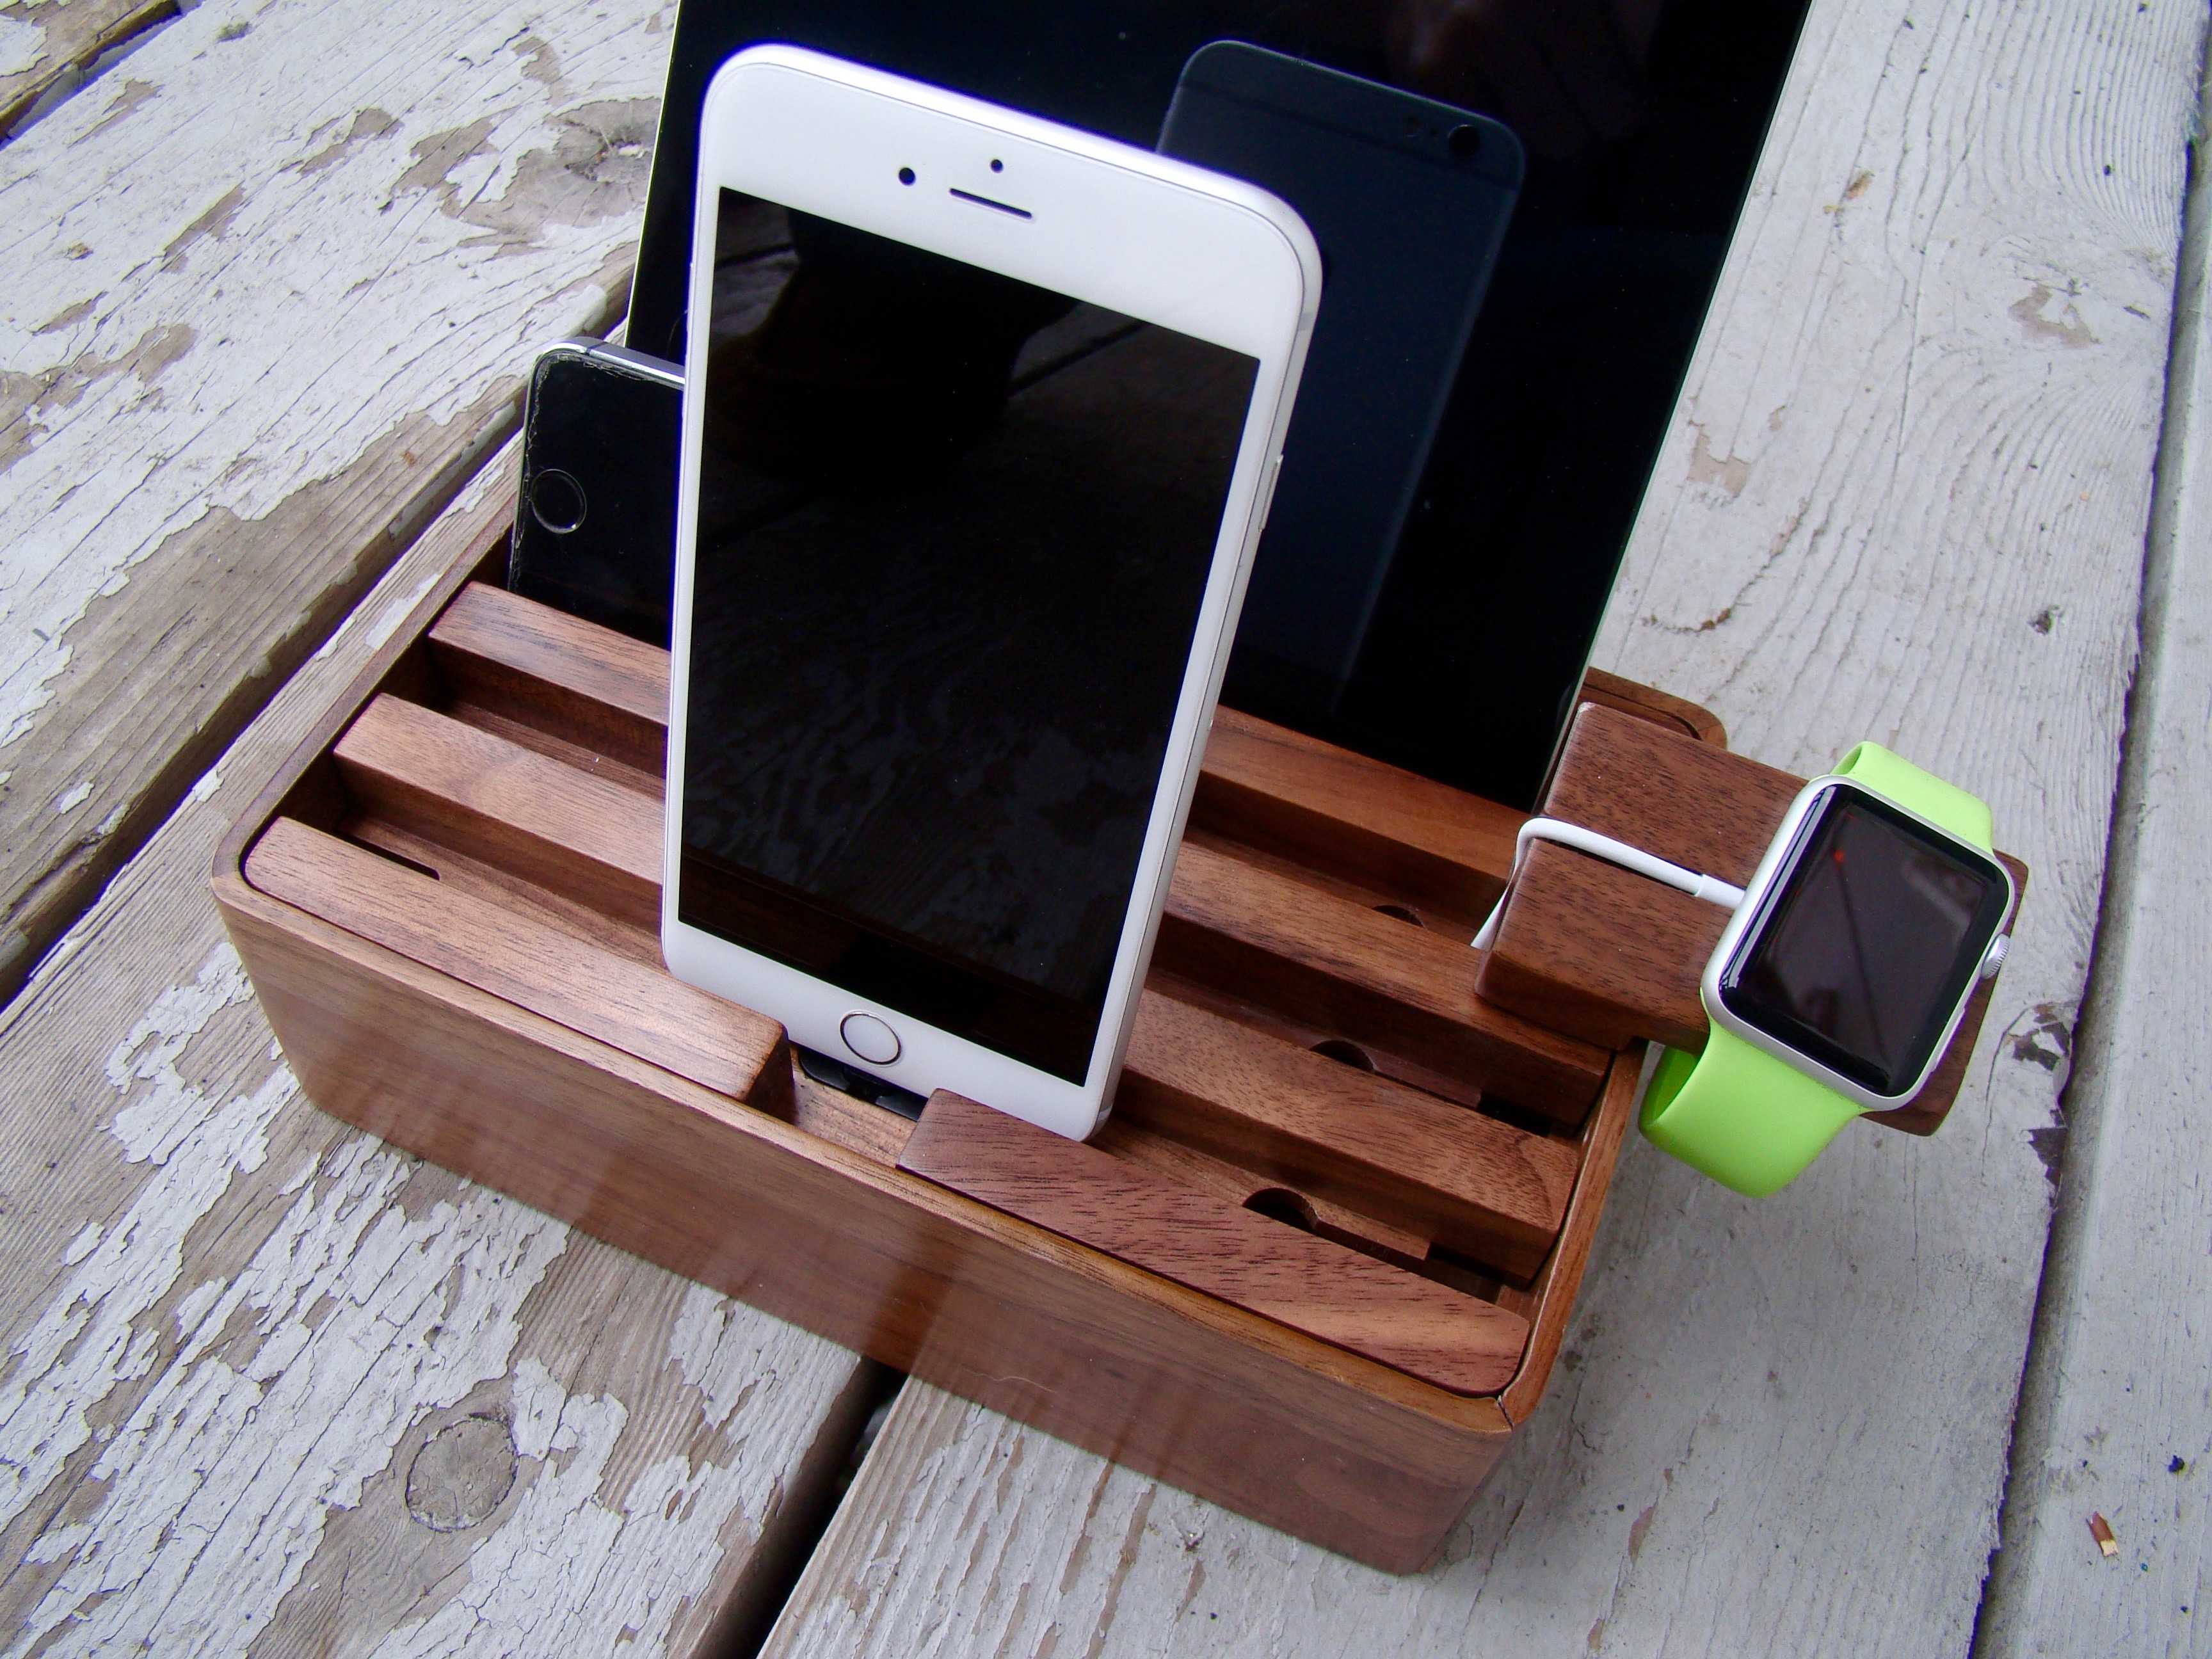 Stylish wooden dock charges